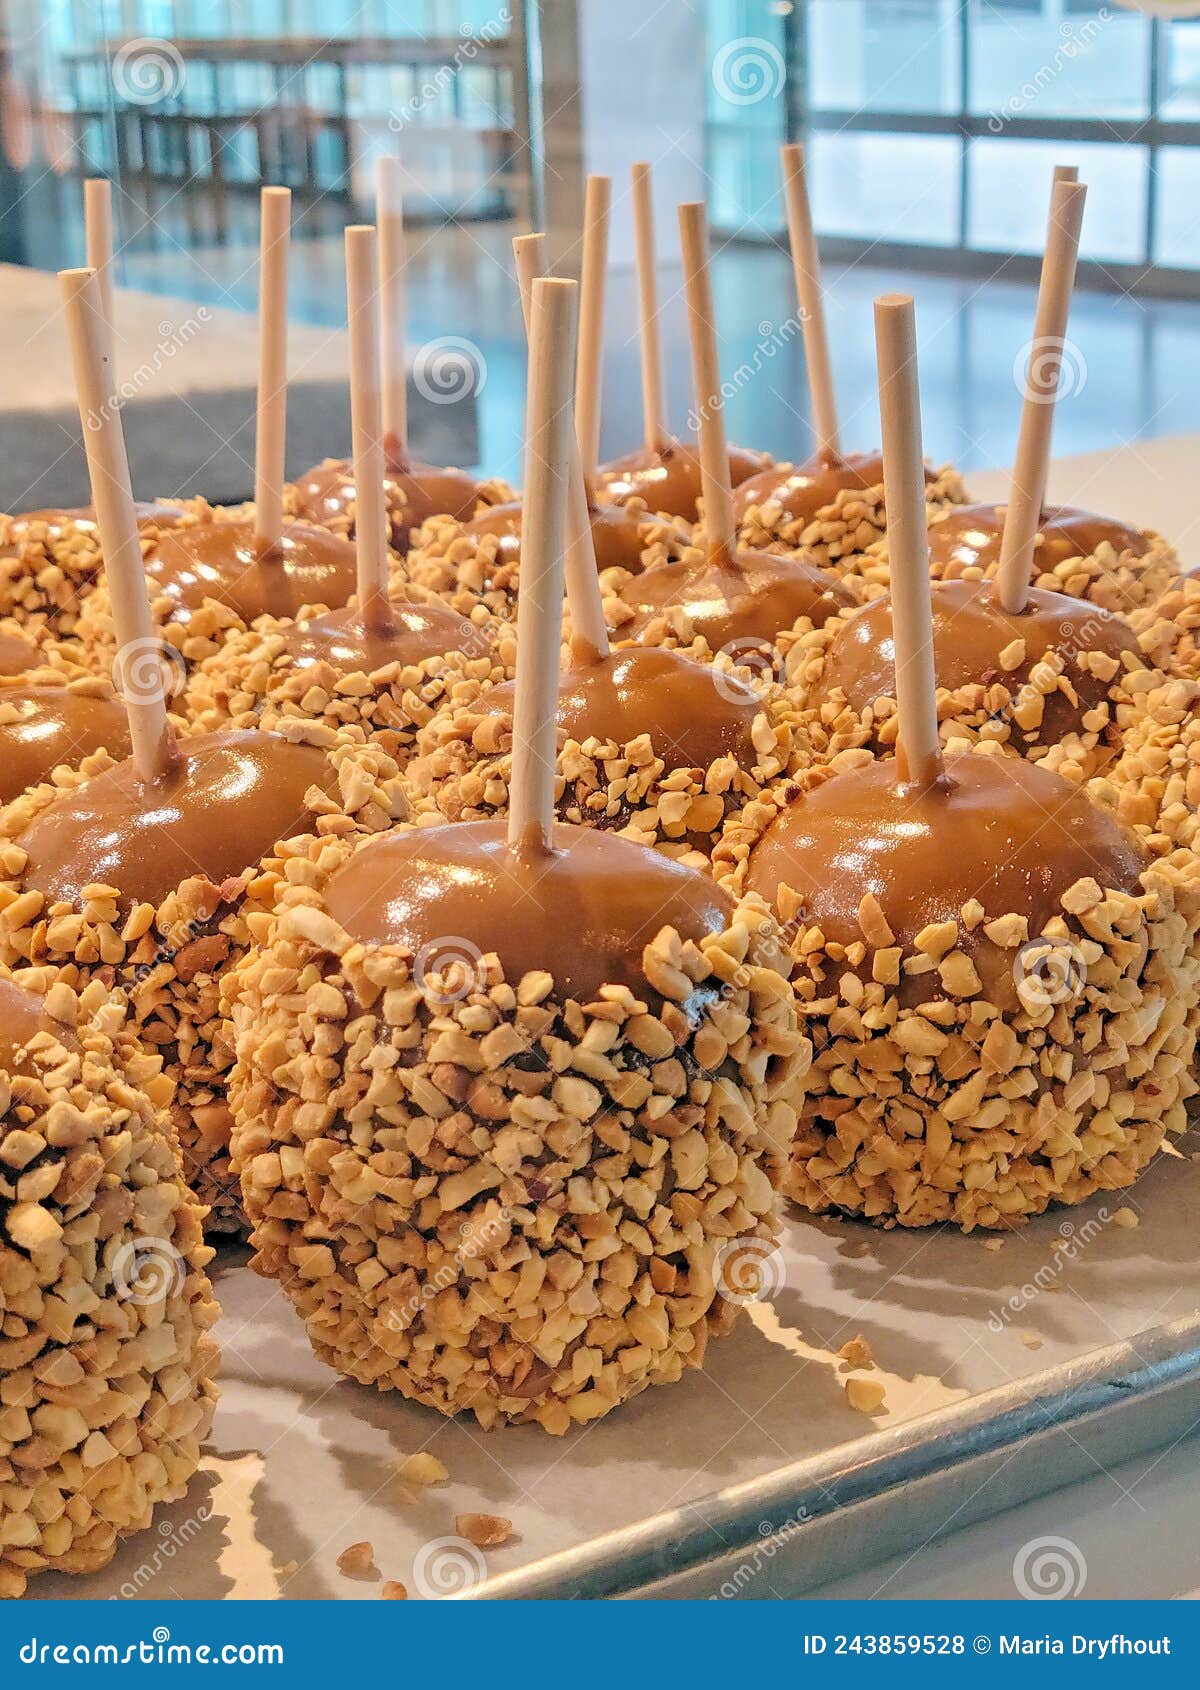 Caramel Apples with Nuts on Sticks. Close up of caramel apples on a stick with nuts